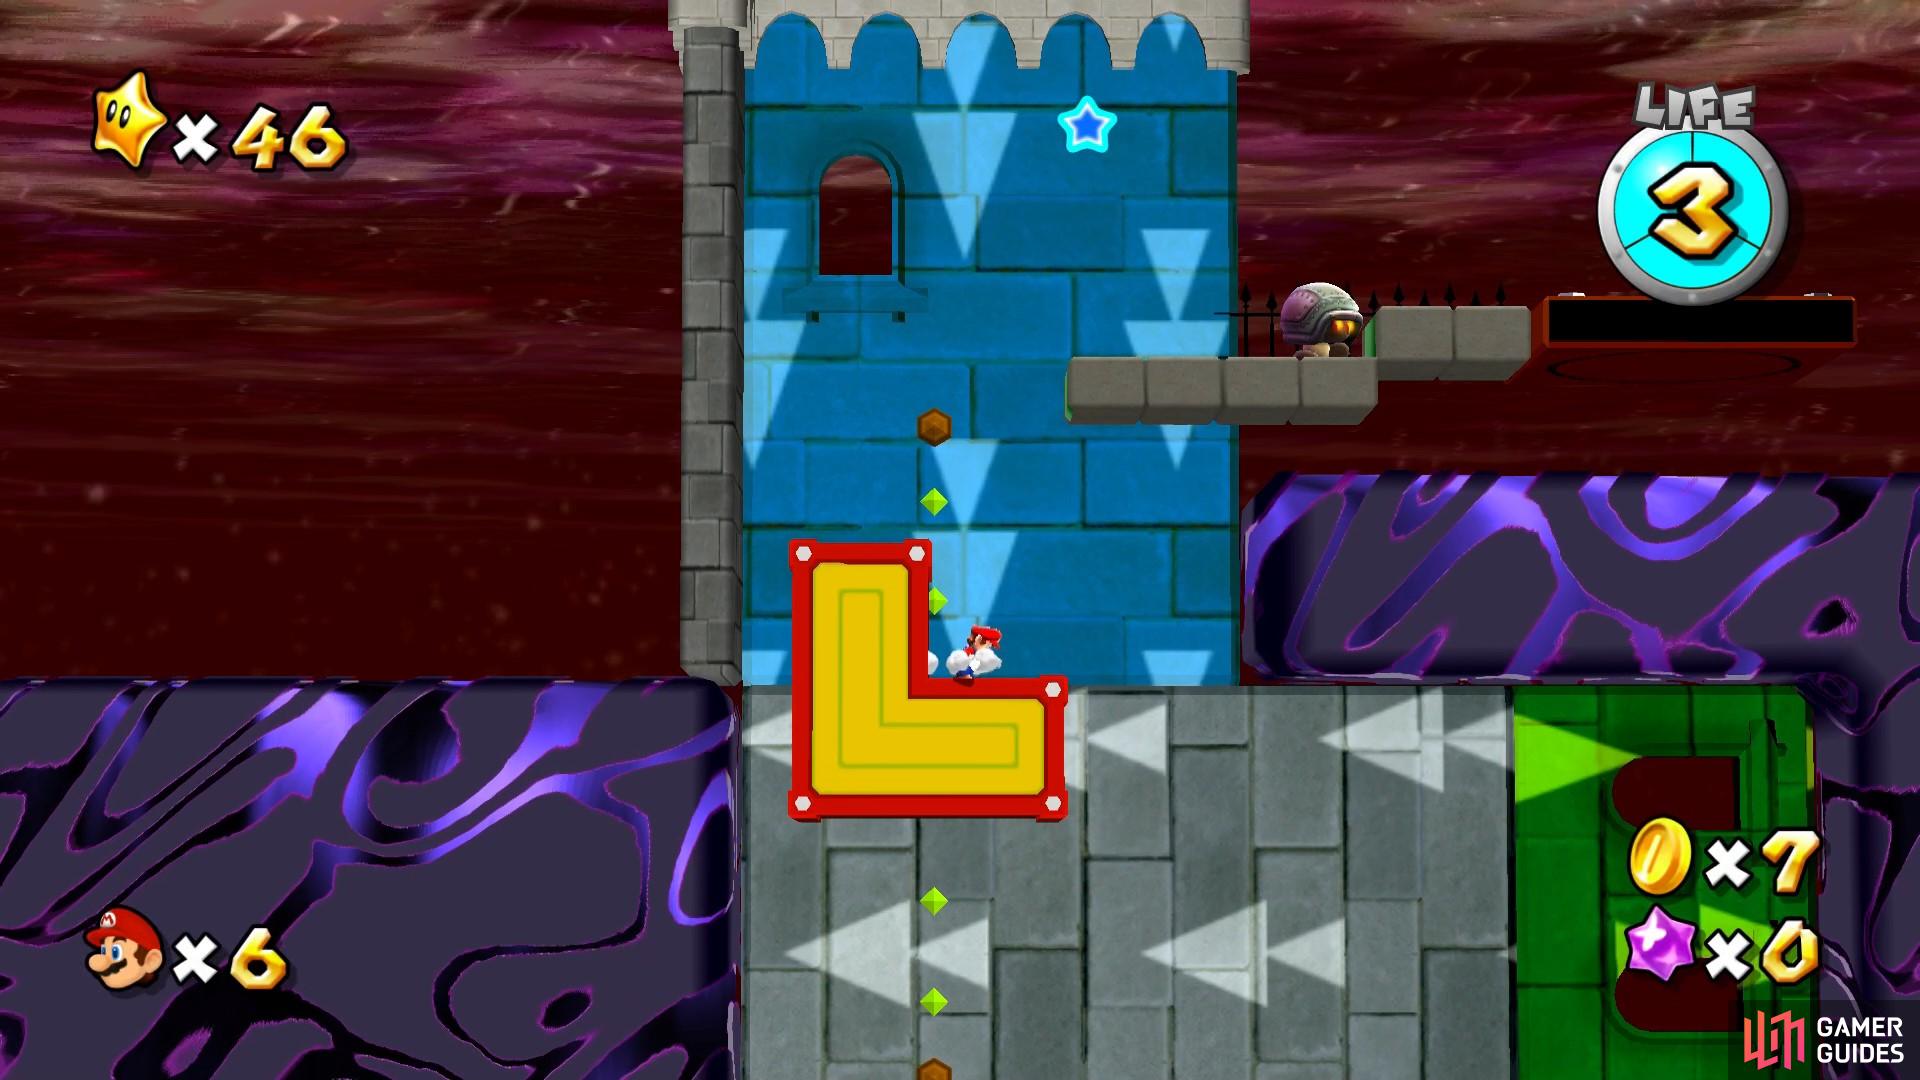 The goombeetle will be awaiting you at the end of the gravity rooms.